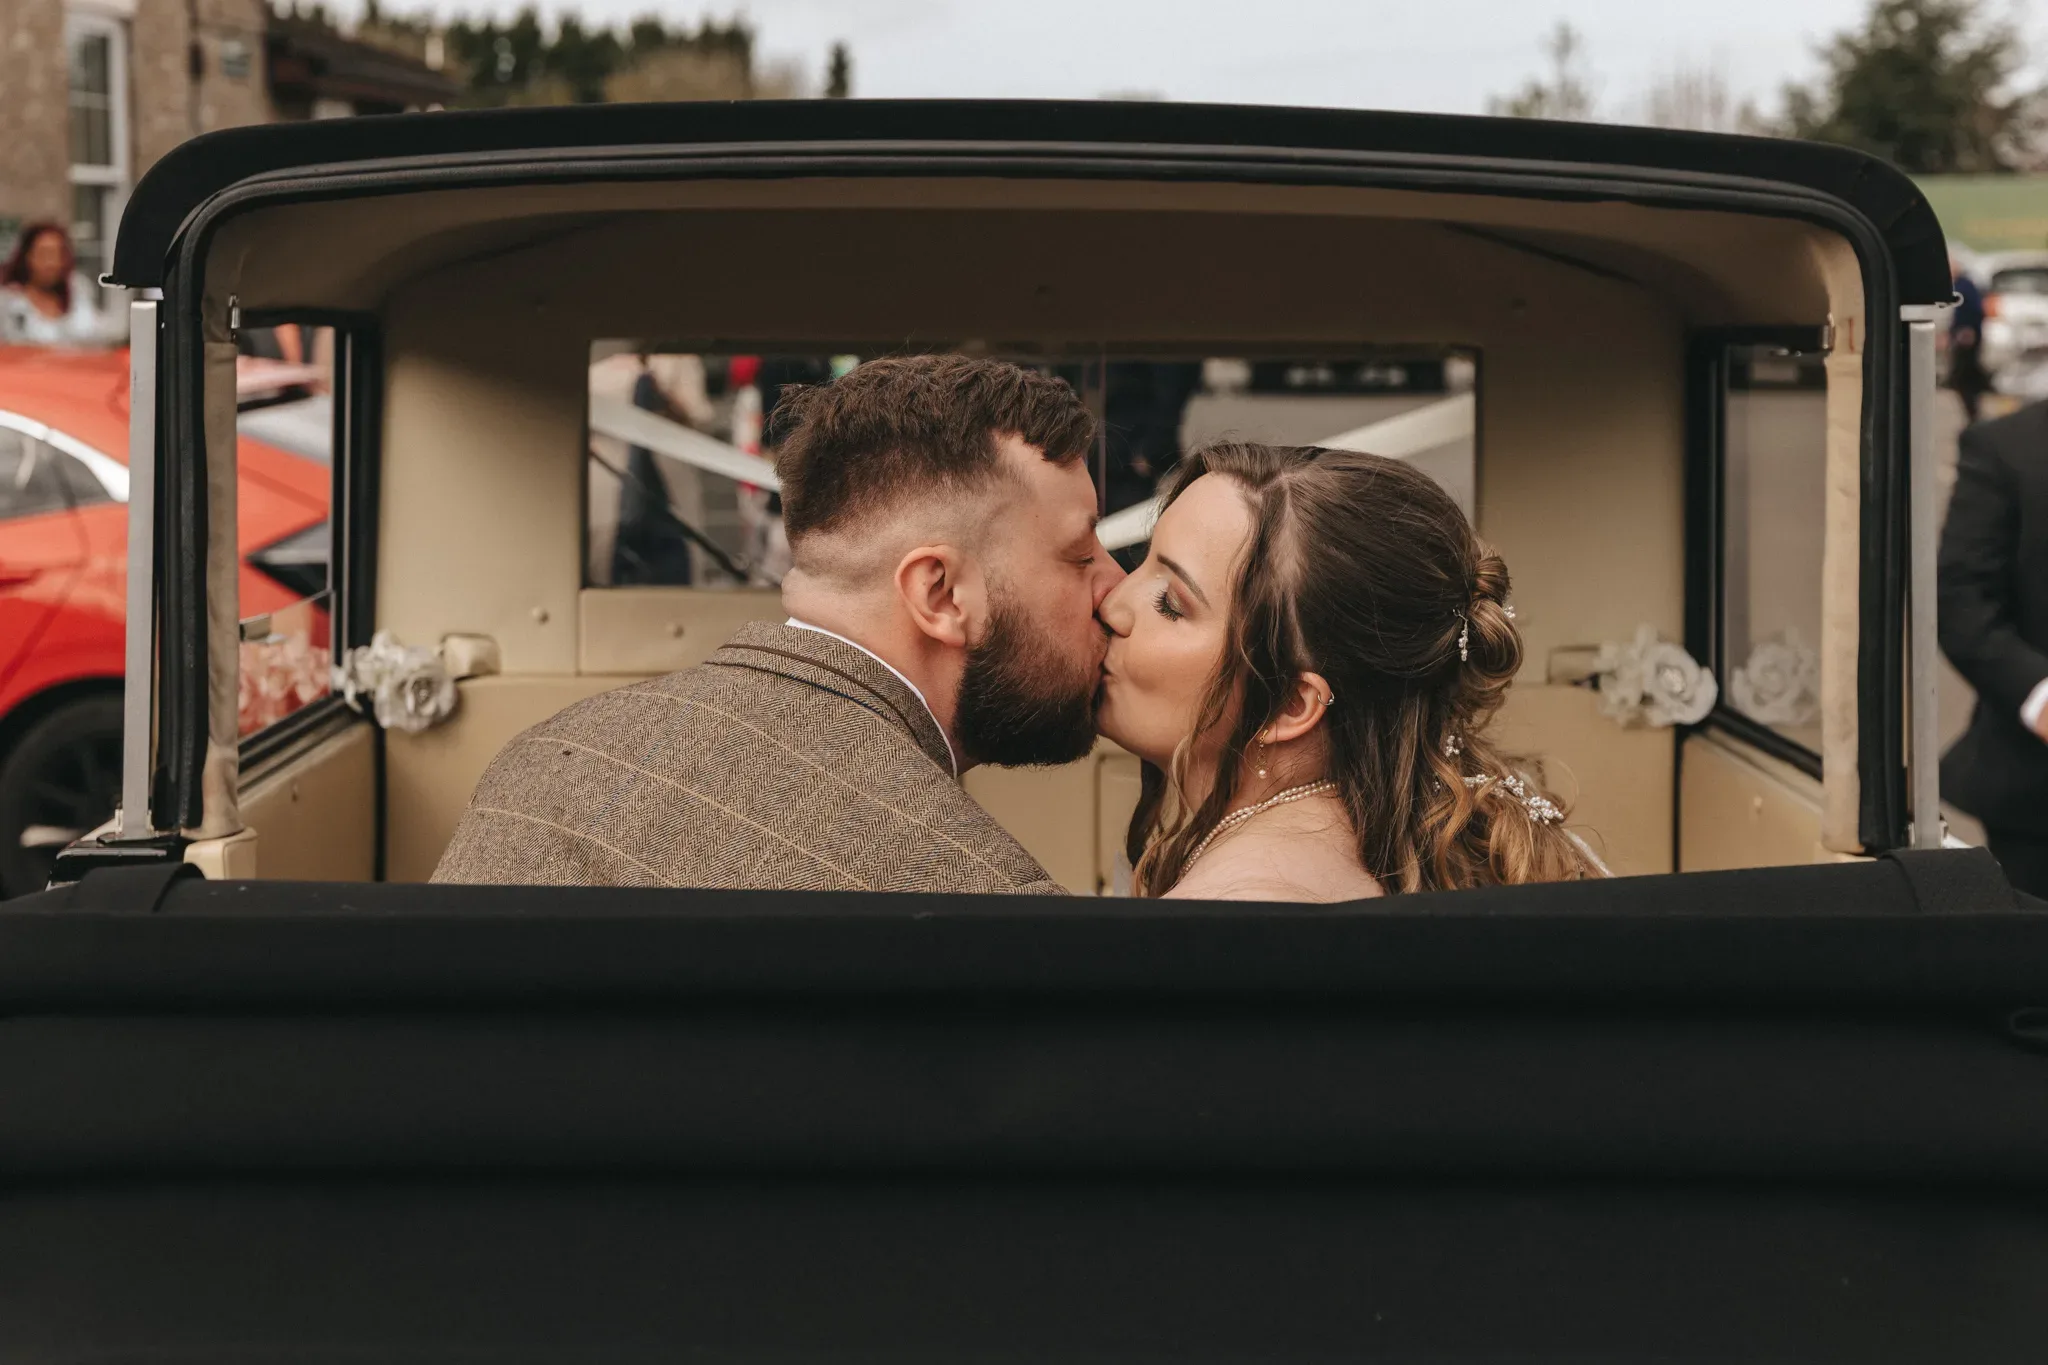 A bride and groom share a kiss inside a vintage car with the top down. the background shows a softly blurred hillside and other vintage cars, creating a romantic, timeless atmosphere.